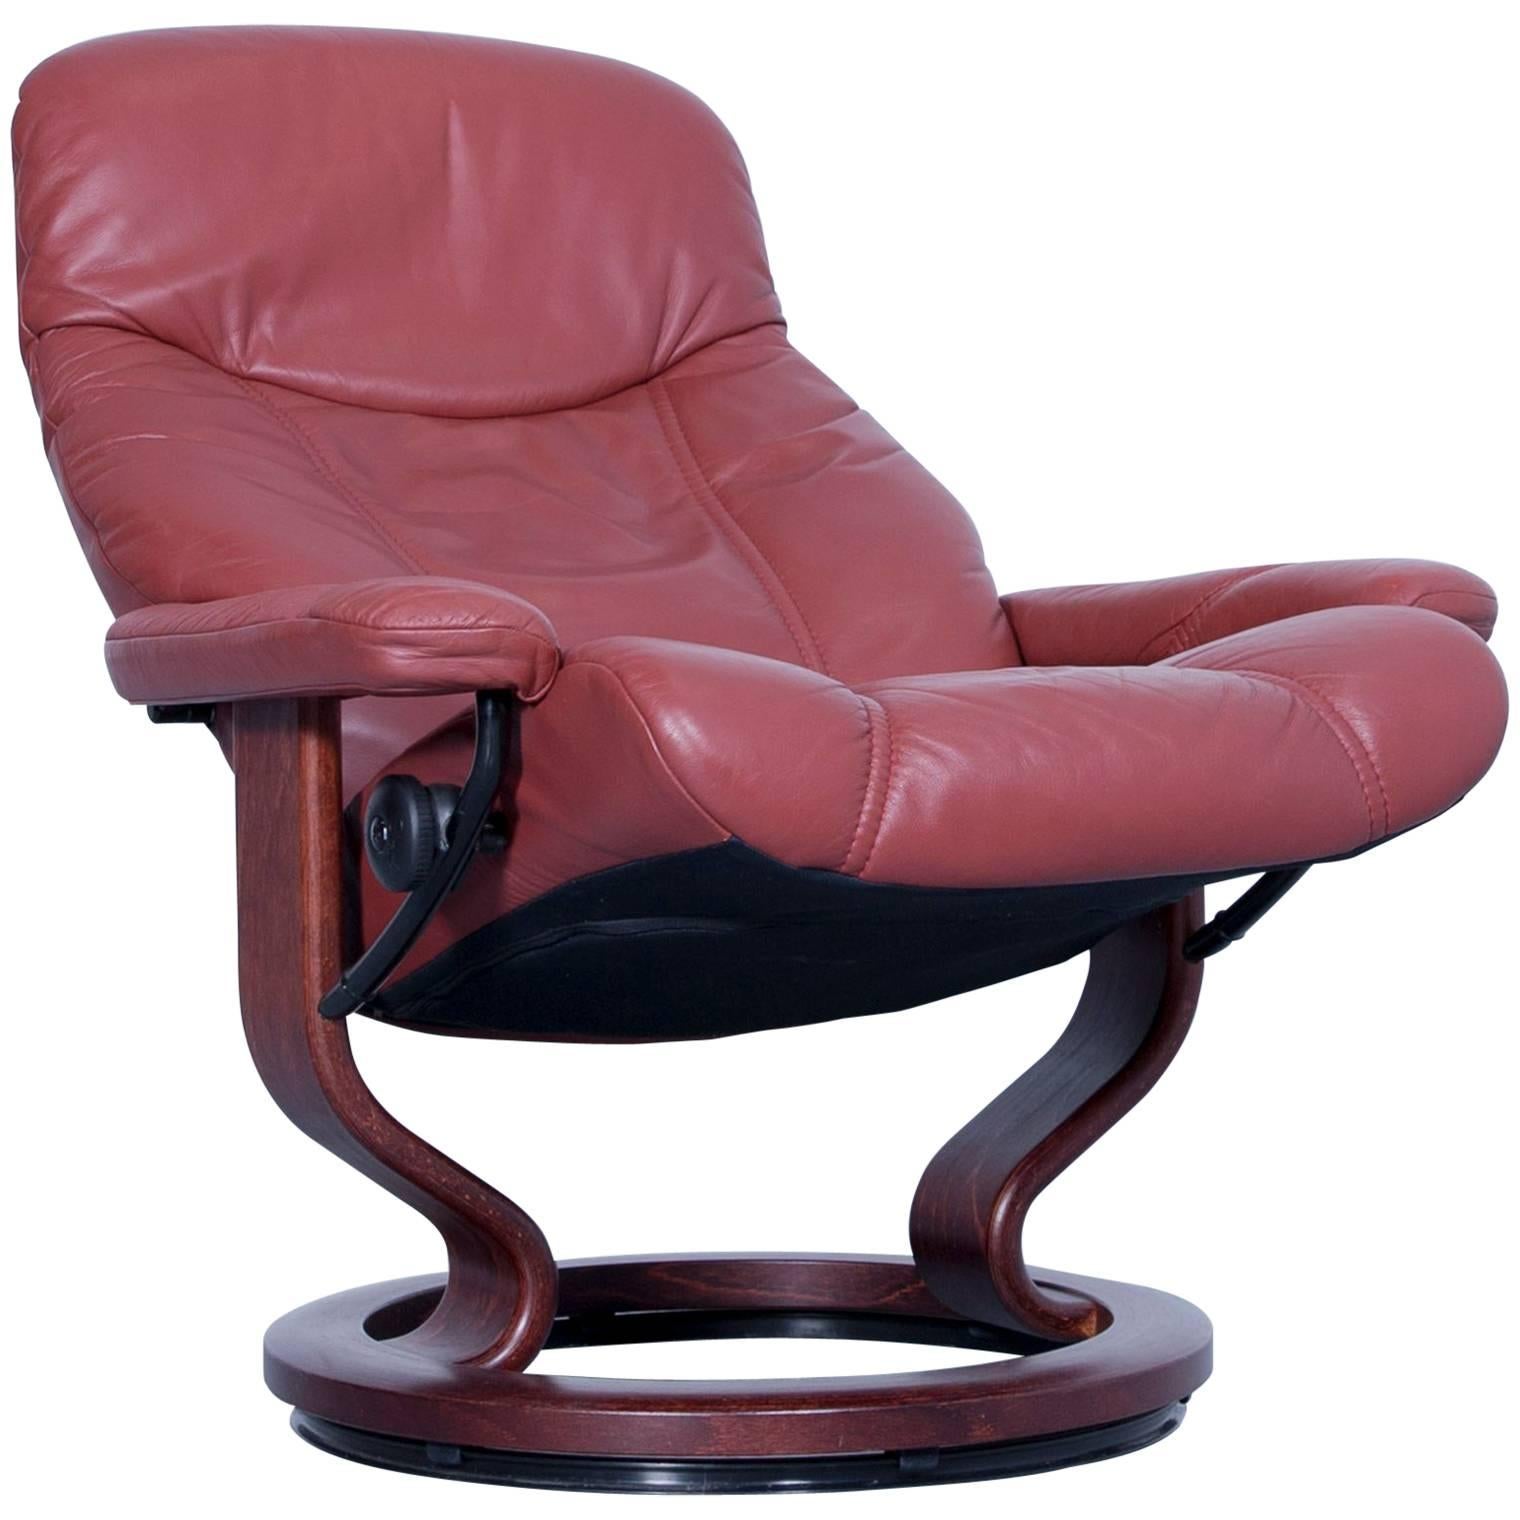 Stressless Consul M Chair Leather Red Brown Relax Function Couch Modern